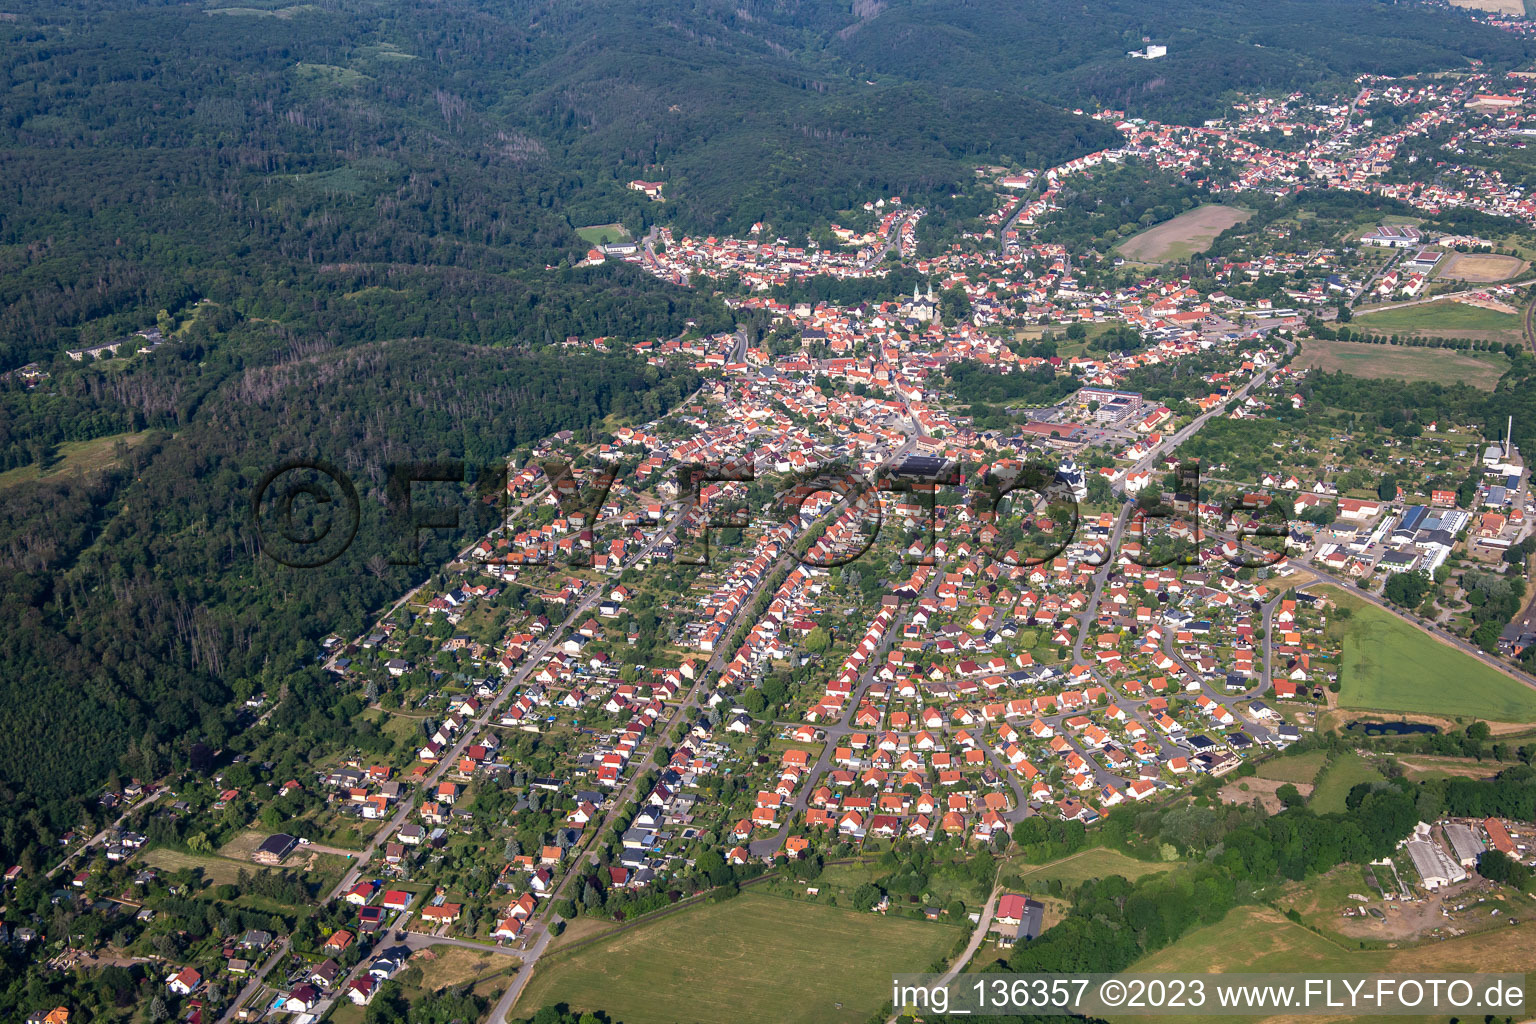 Aerial view of Osterallee in the district Gernrode in Quedlinburg in the state Saxony-Anhalt, Germany